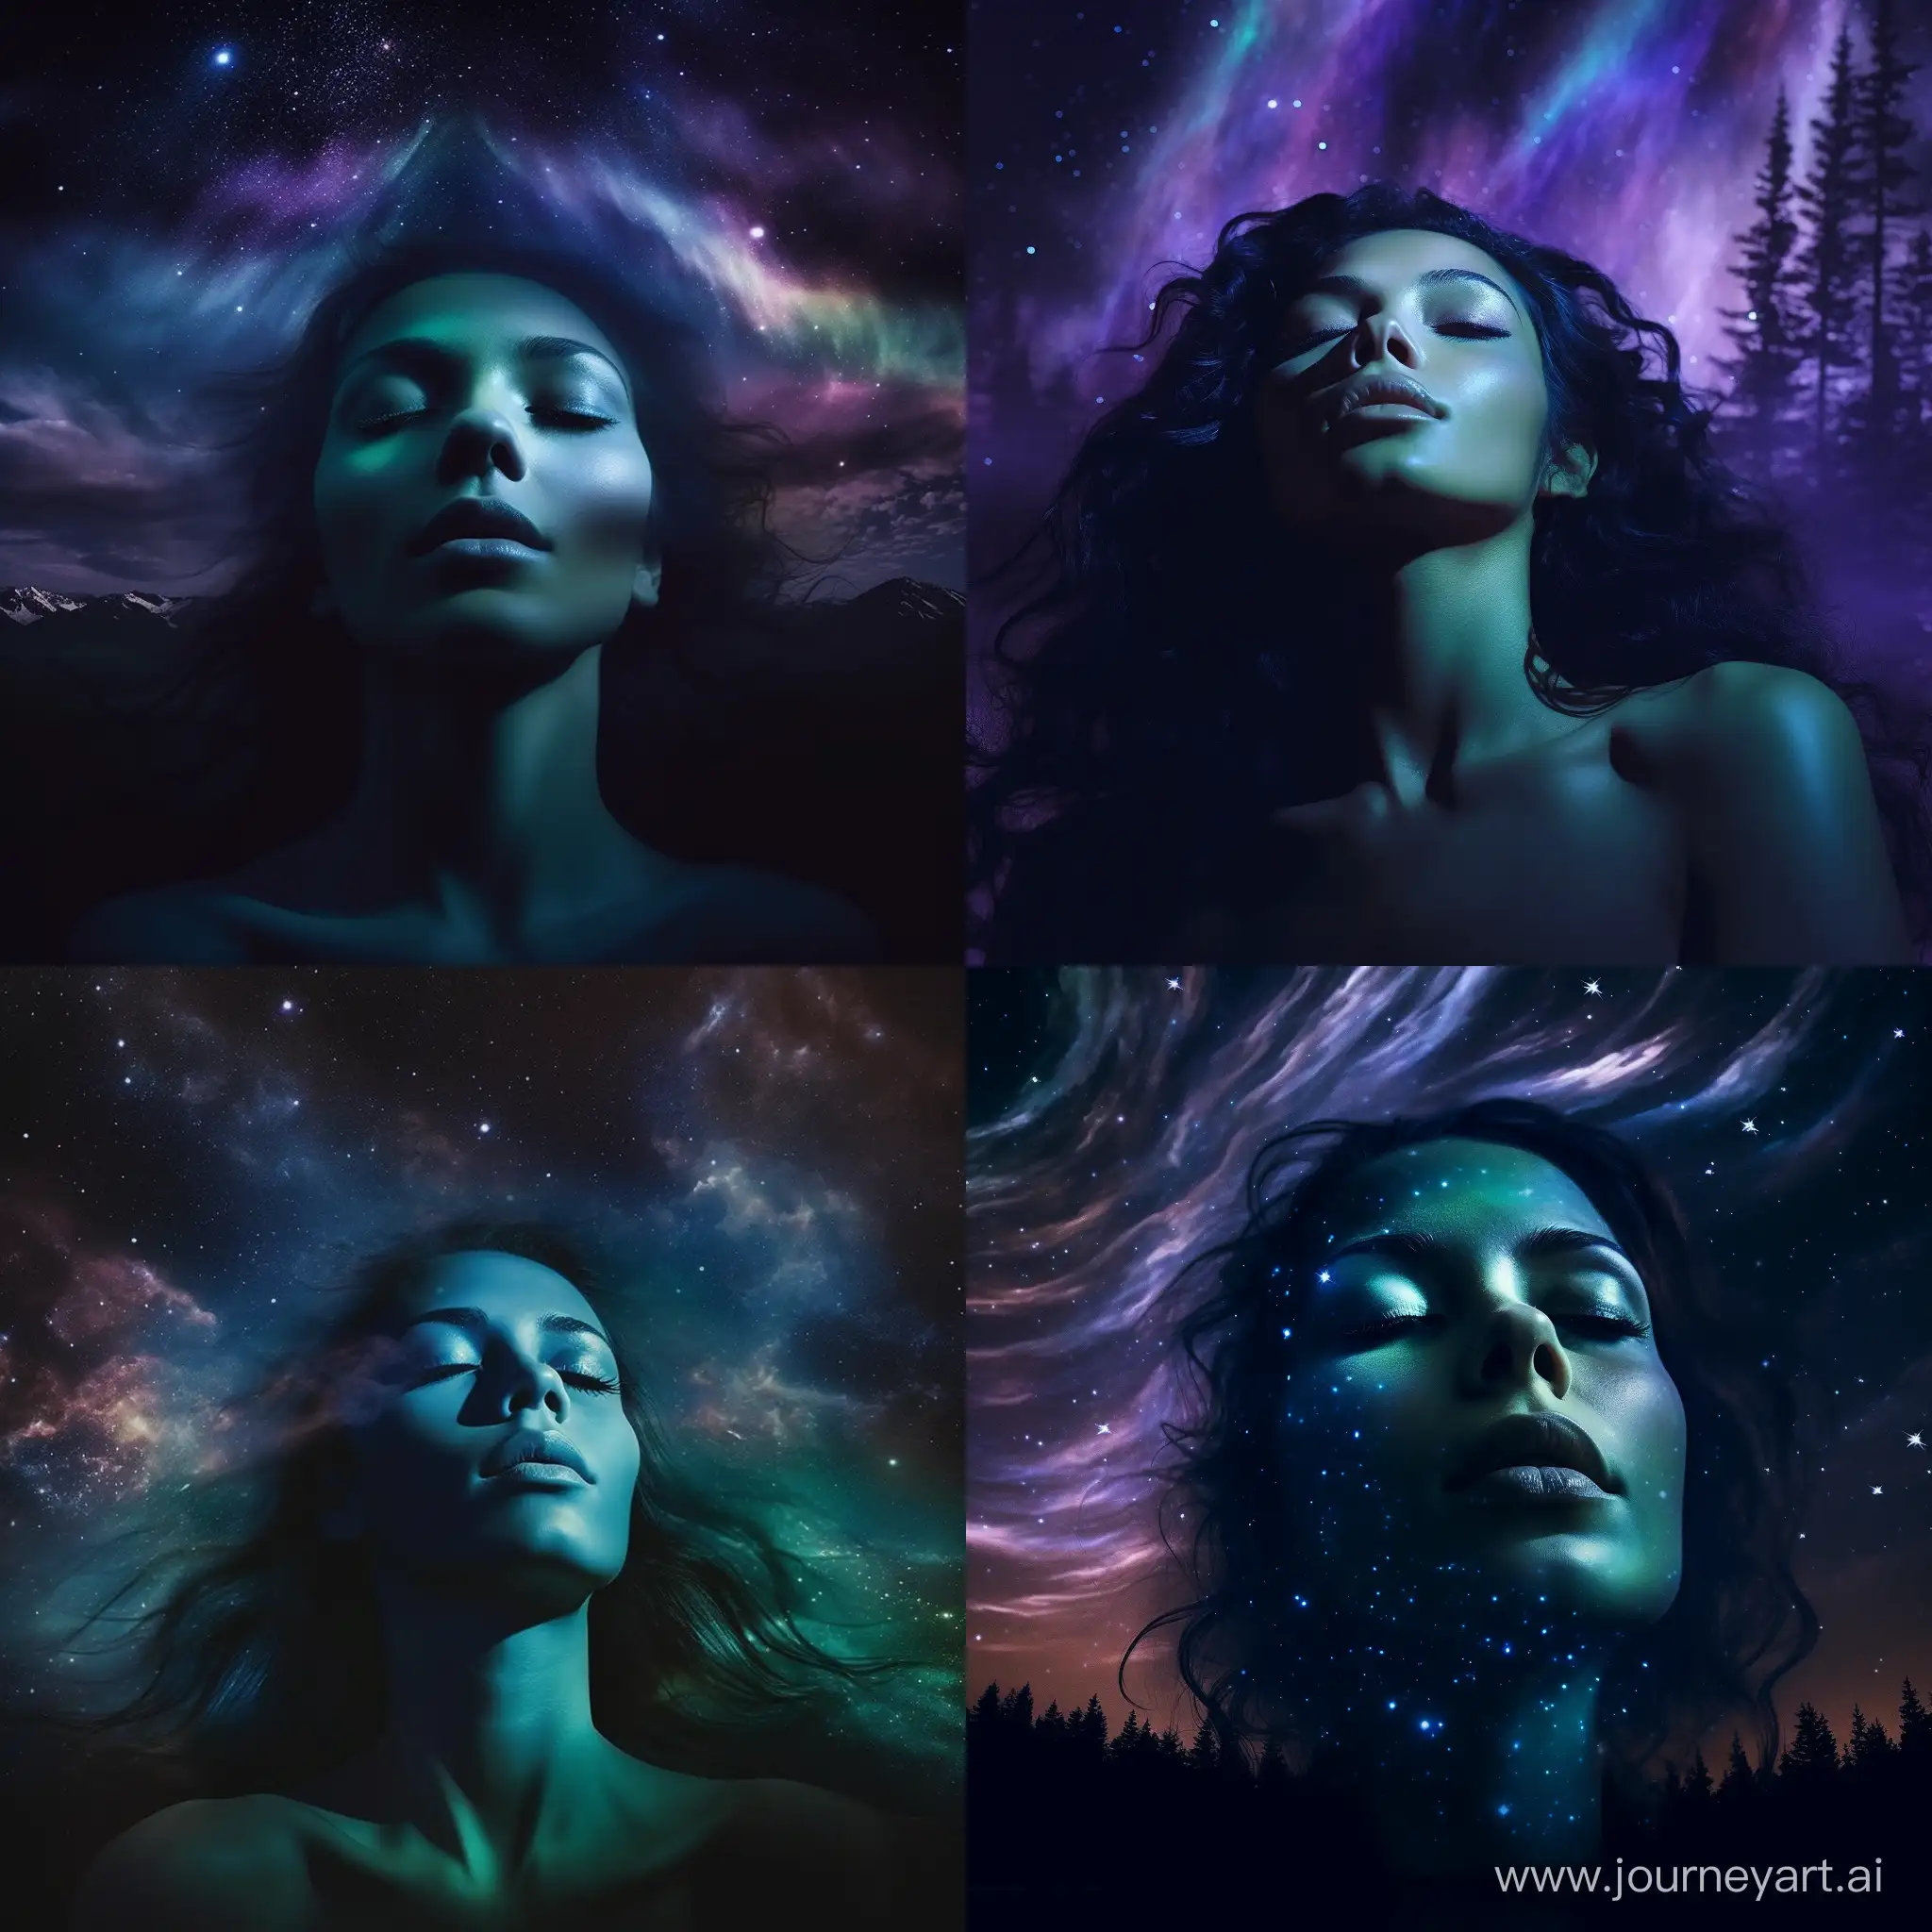 Starry-Night-Portrait-of-a-Woman-with-Aurora-Borealis